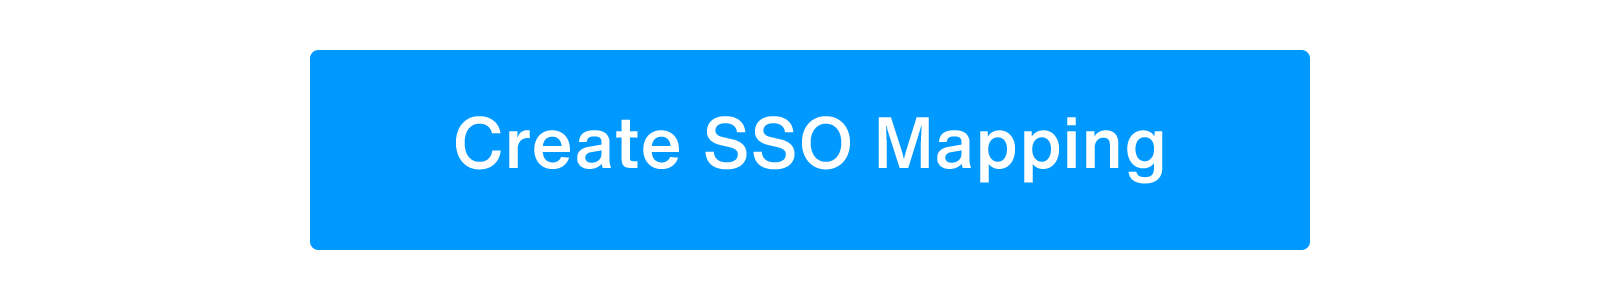 create sso mapping button